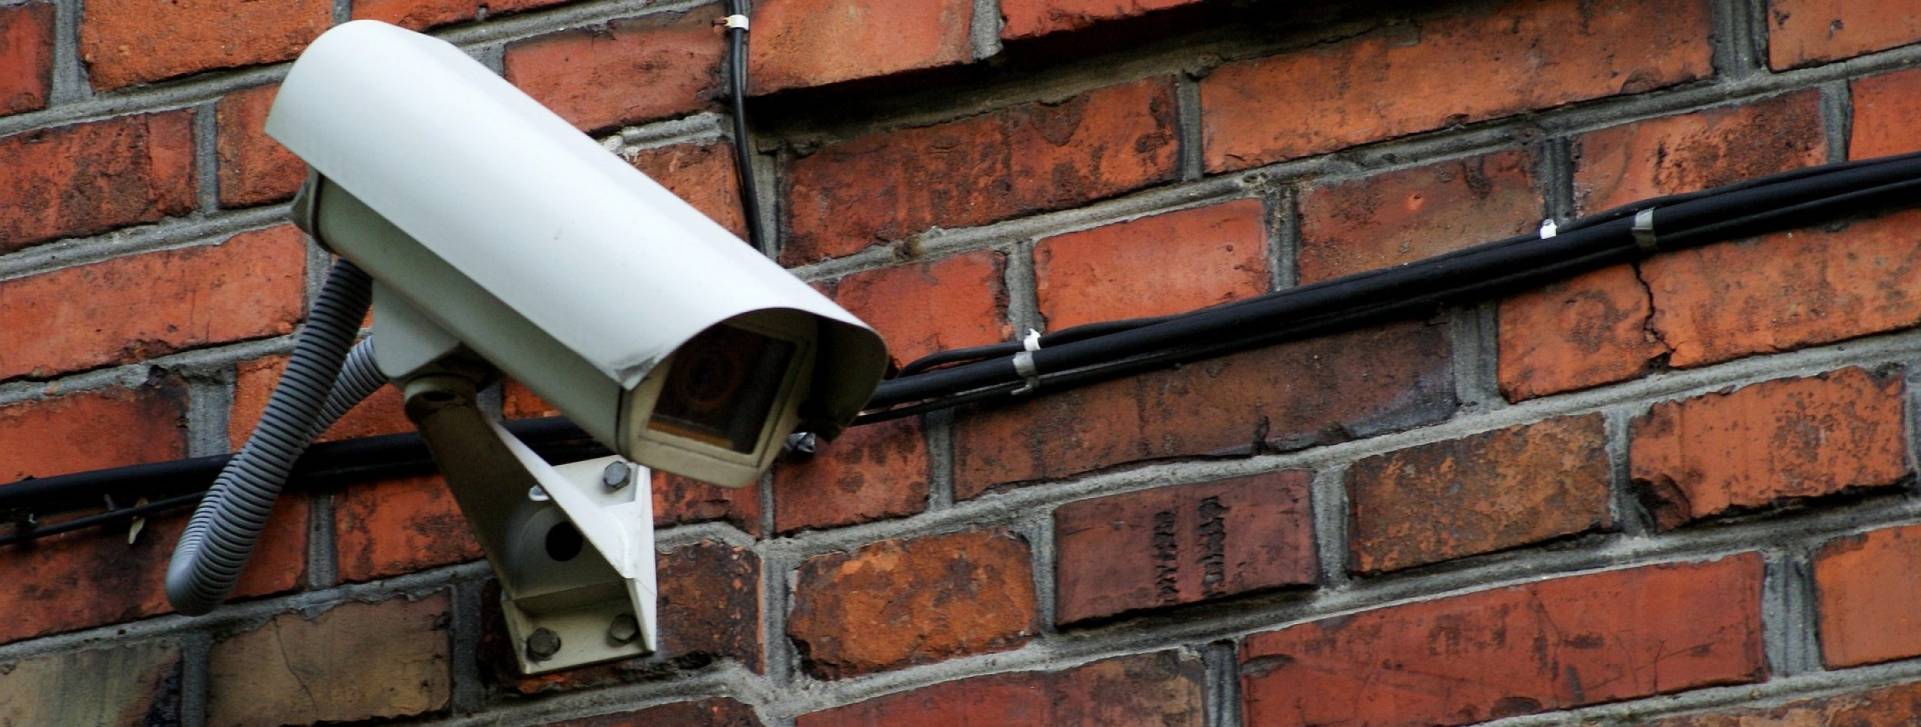 CCTV Monitoring in Hertfordshire and London